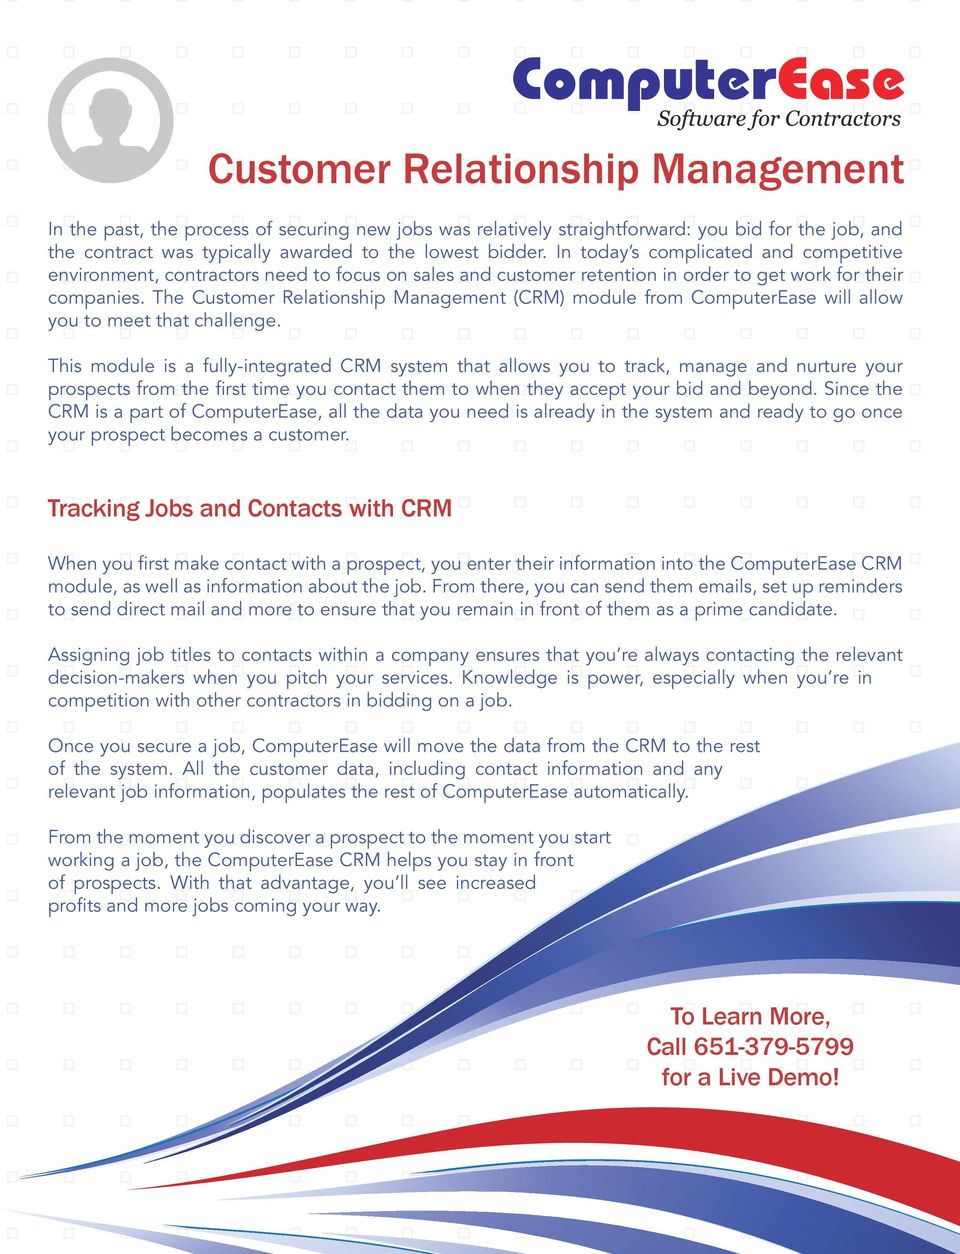 The Customer Relationship Management (CRM) module from ComputerEase will allow you to meet that challenge.